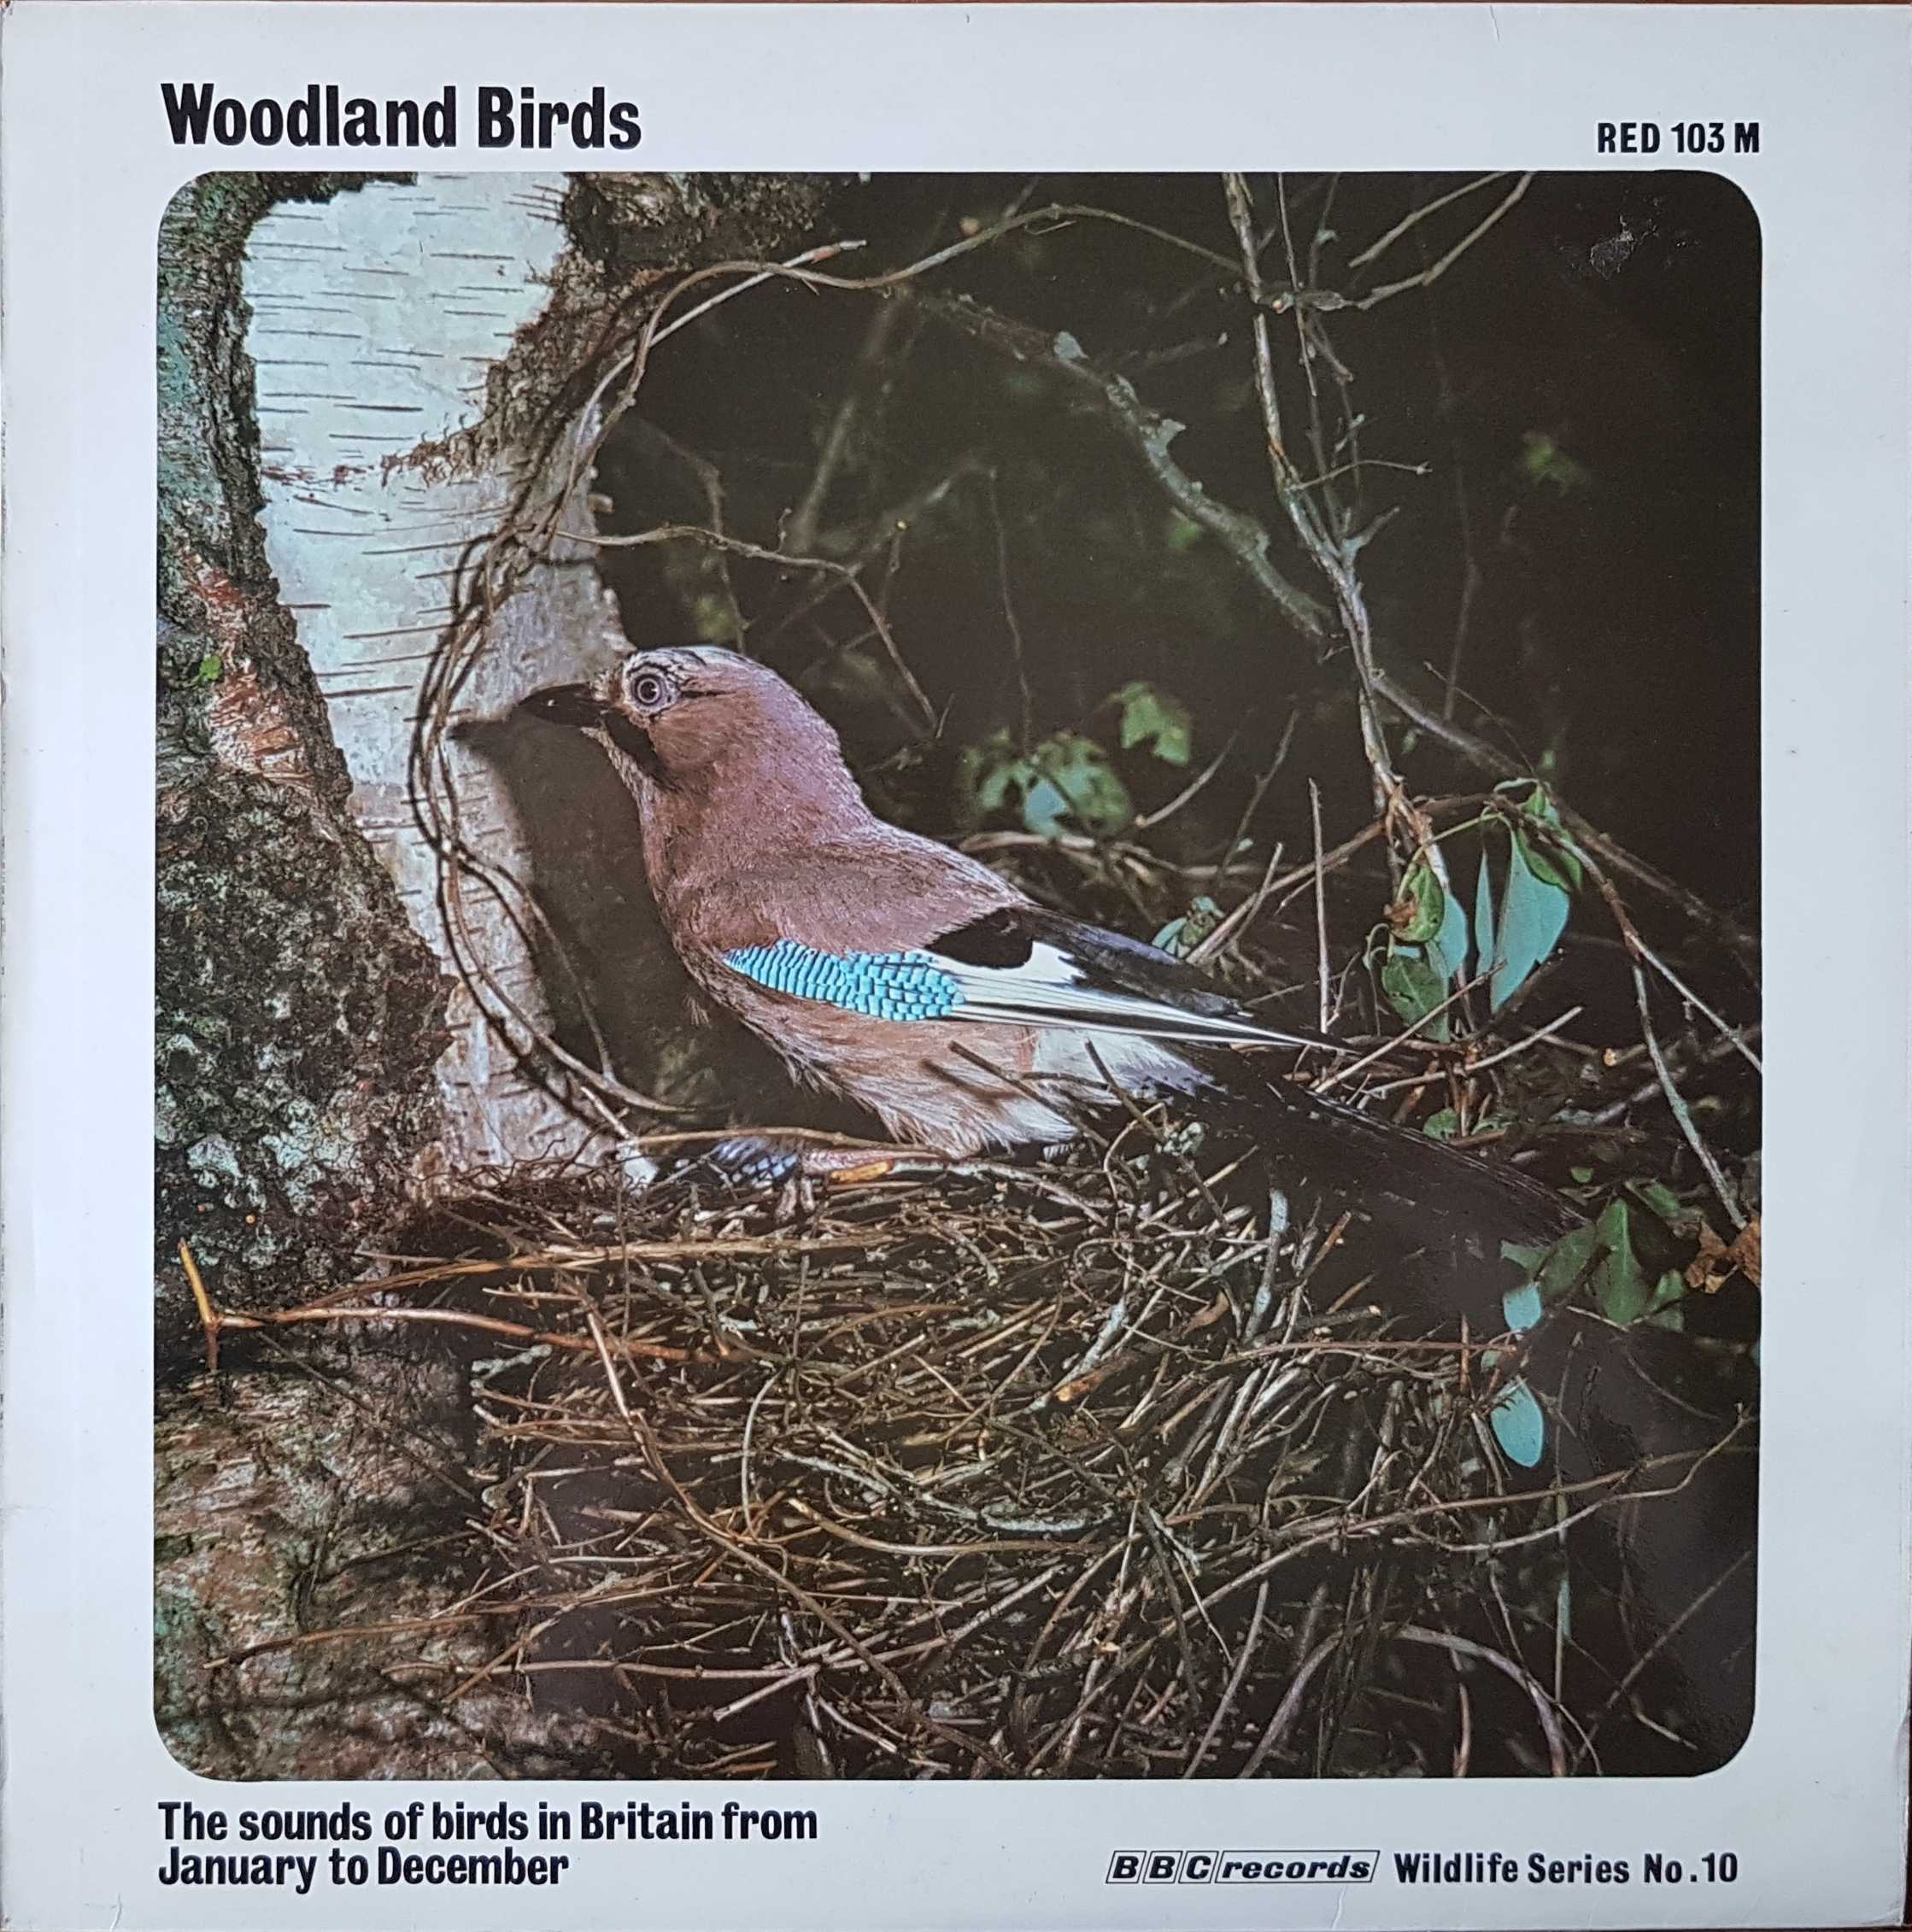 Picture of RED 103 Woodland birds - BBC wildlife series no. 10 by artist Various from the BBC albums - Records and Tapes library